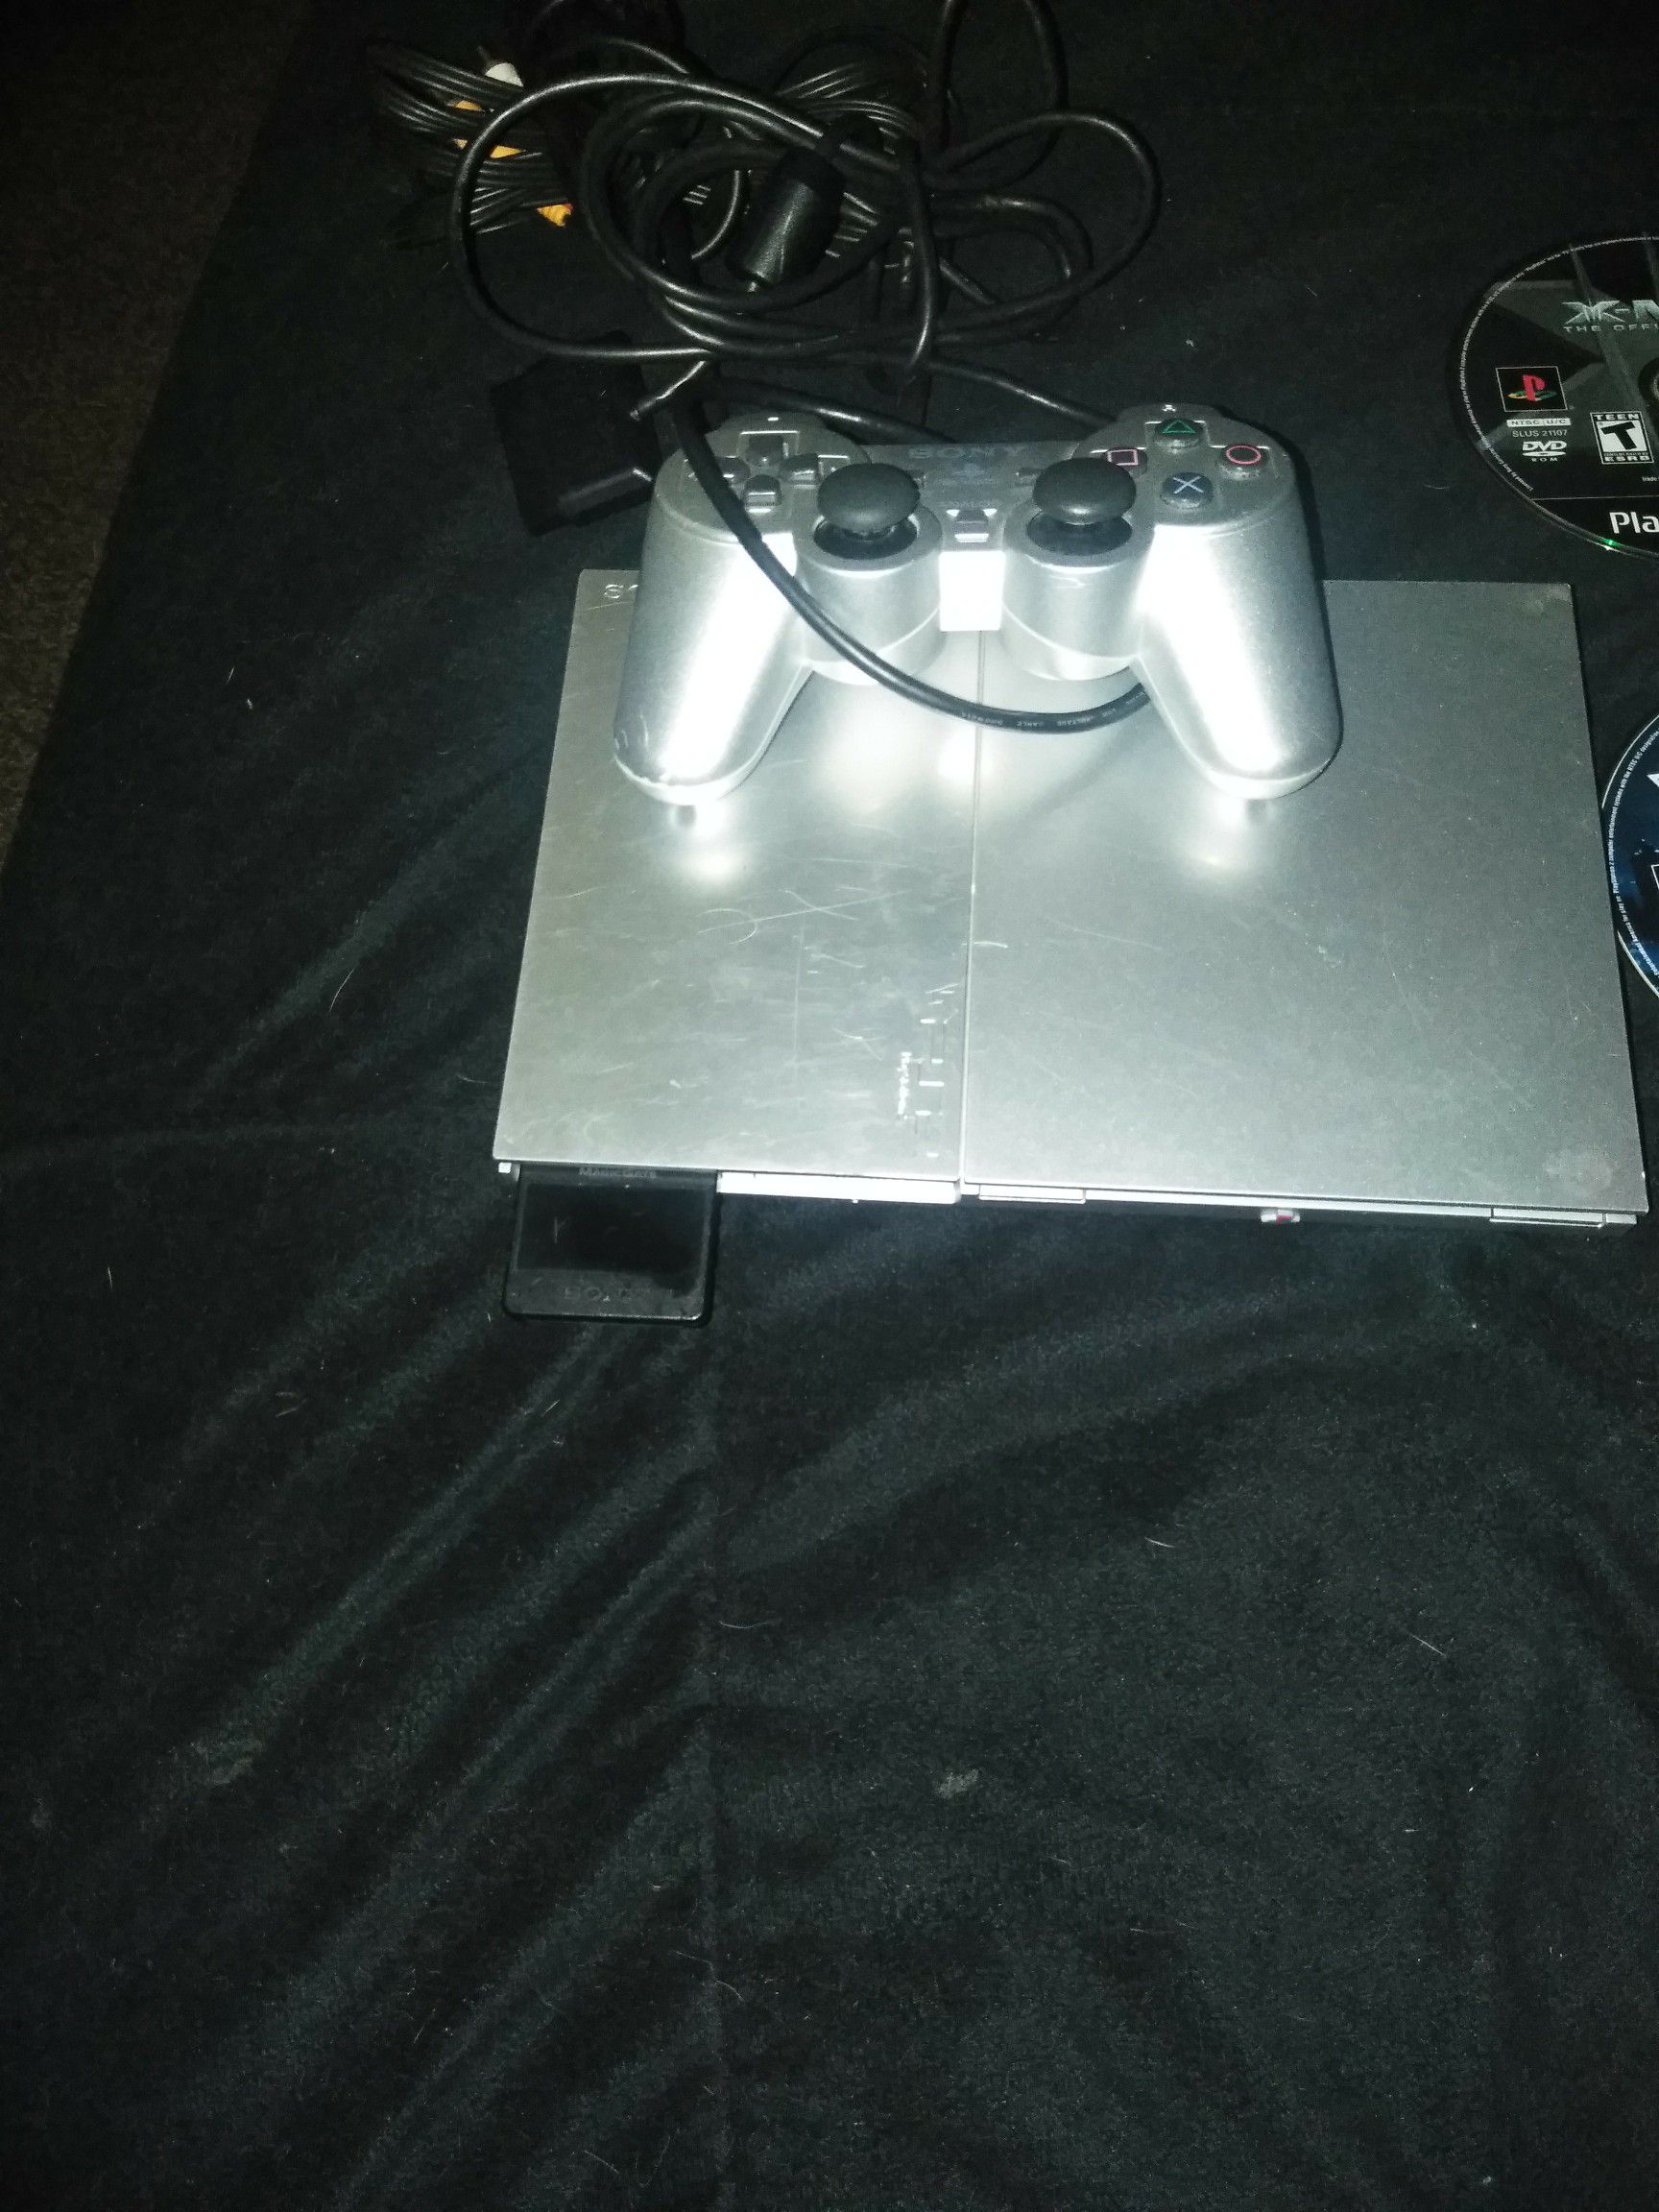 Play station 2 with hook ups and 45 games $125 or best offer